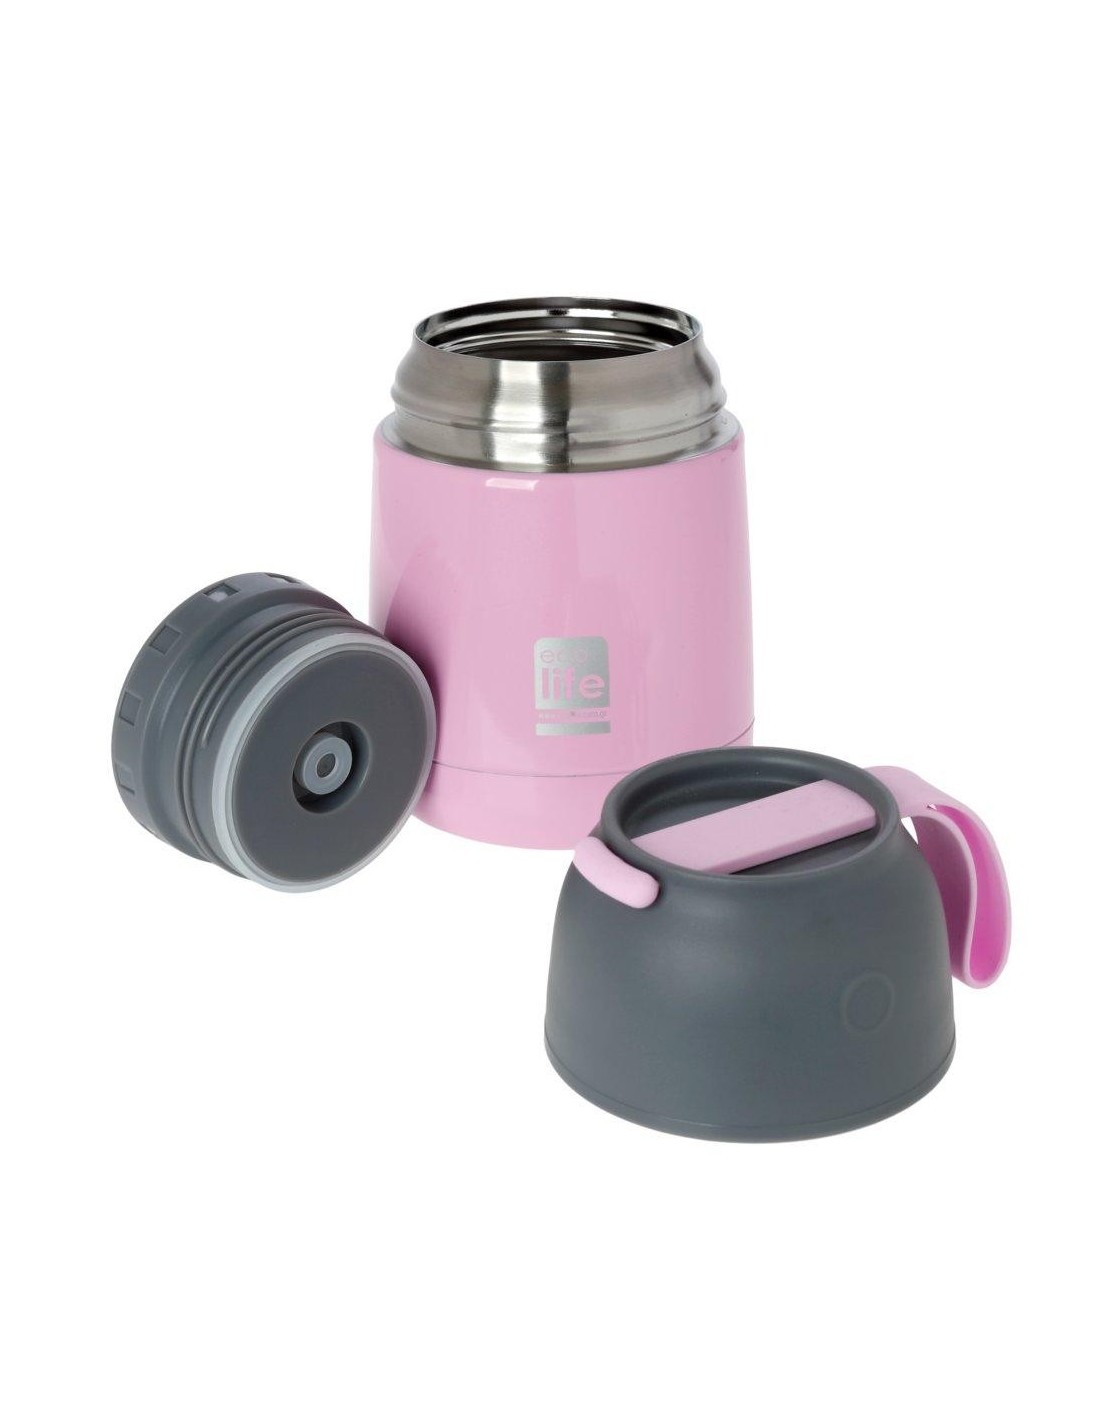 ECOLIFE FOOD CONTAINER BABY PINK 450ML